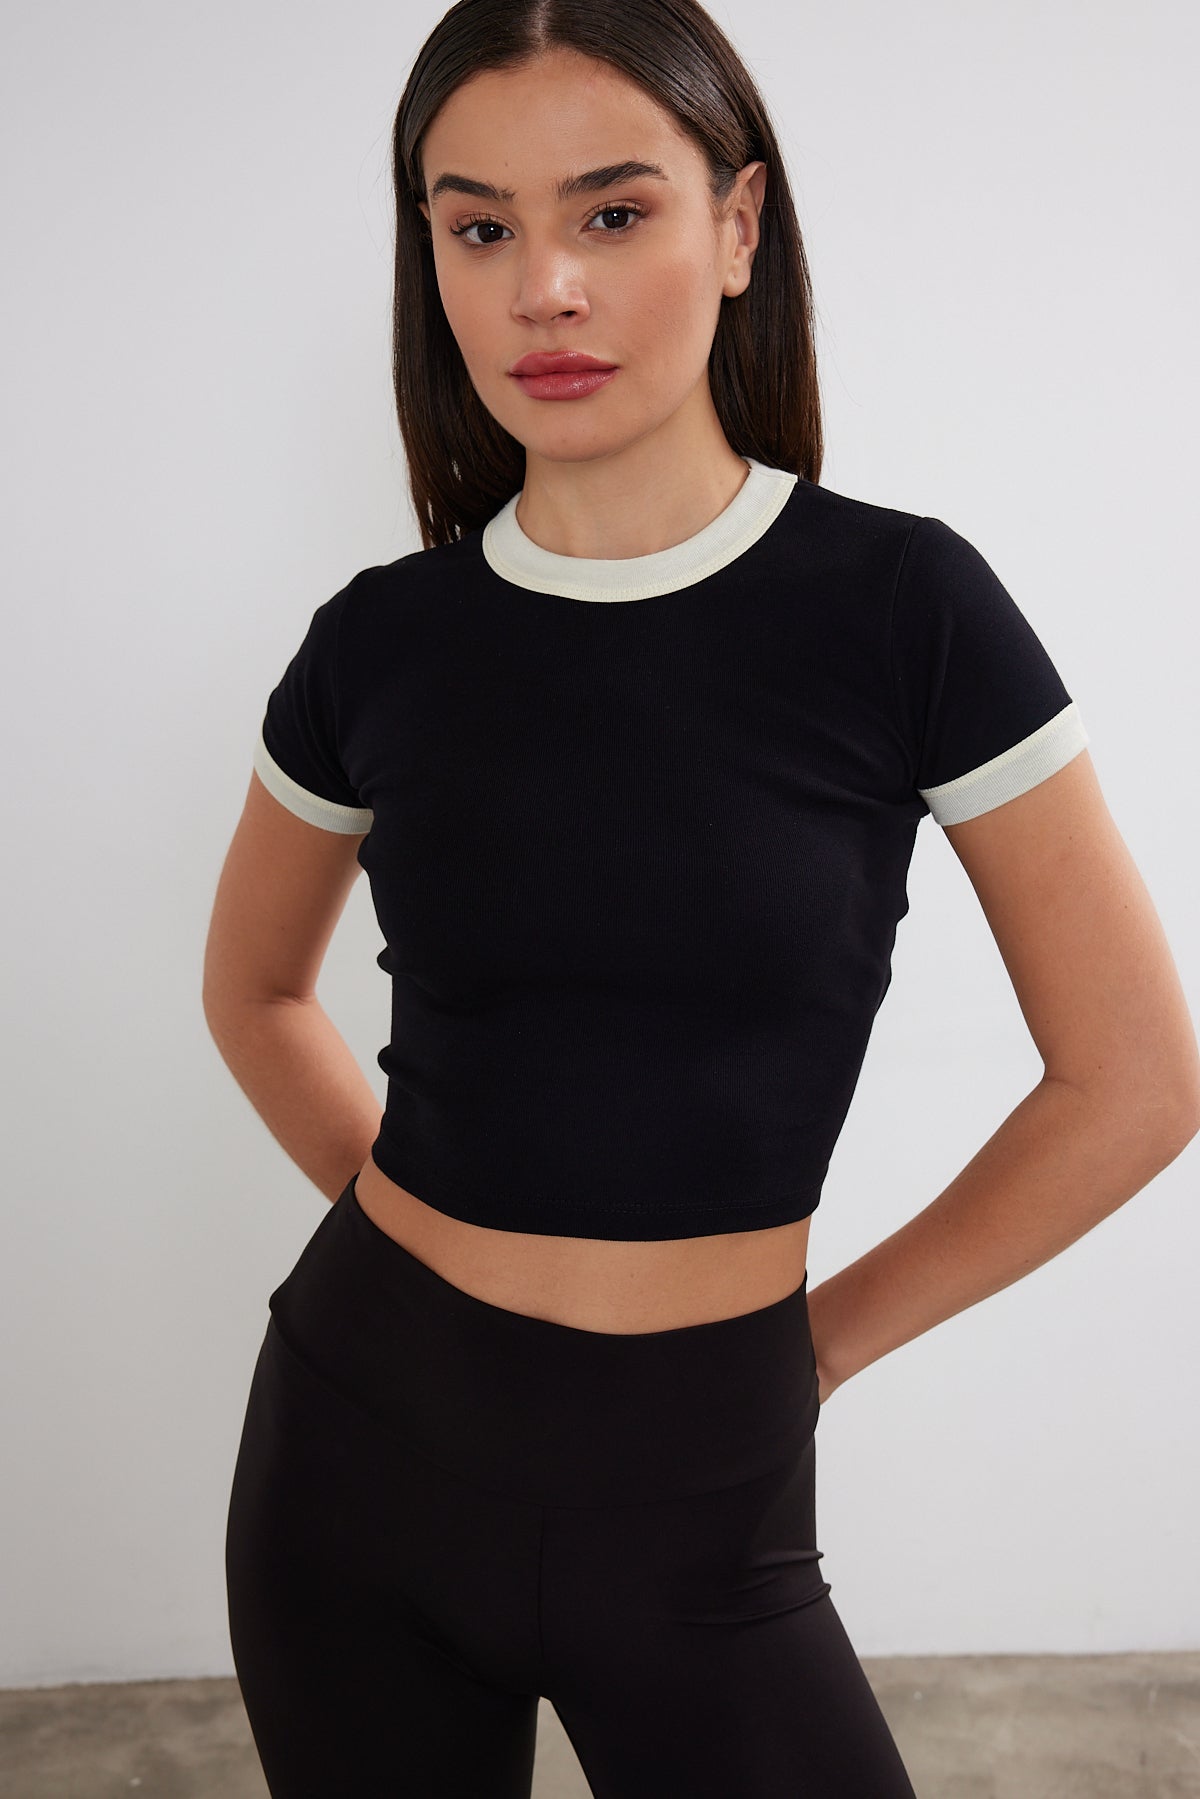 Blank Crop Top Two Tone Cotton Crop Top (S-M-L / 2-2-2) 6 PIECES